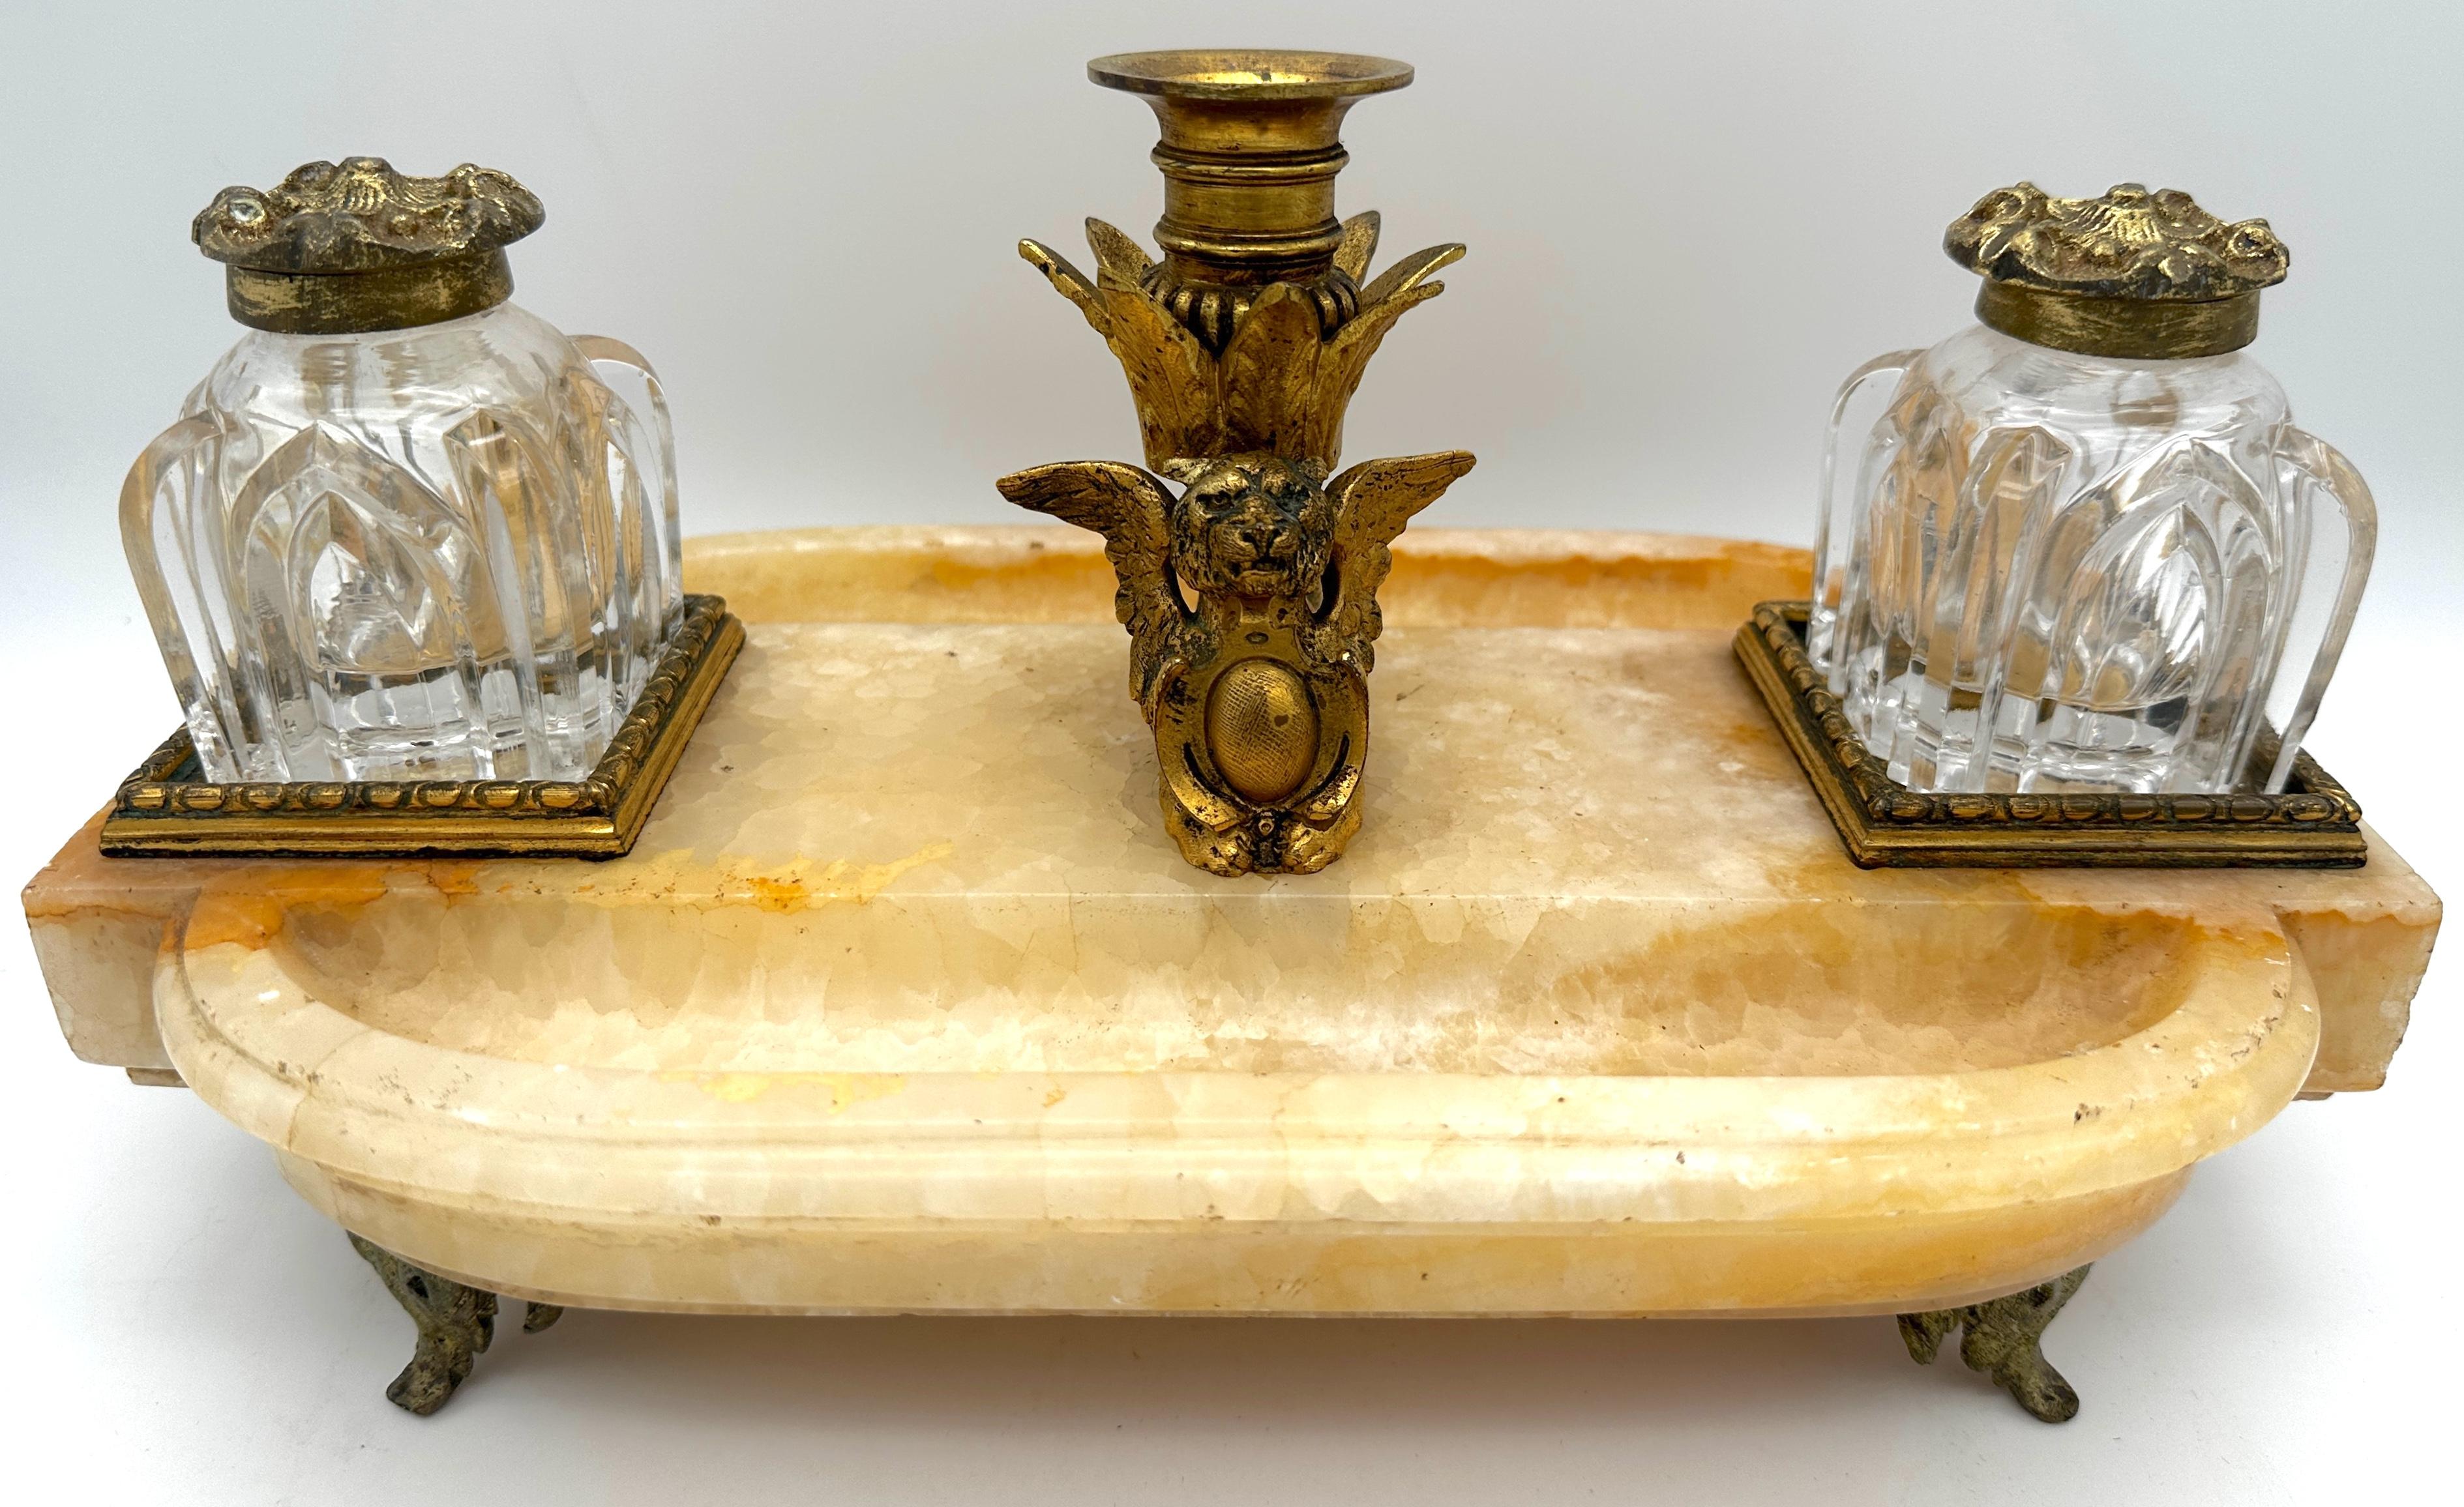 French Gothic Ormolu Cut Glass and Marble/Quartz Double Inkwell
France, circa 1870s

A magnificent French Gothic Ormolu Cut Glass and Marble/Quartz Double Inkwell, dating back to the 1870s. This exquisite piece exemplifies the elegance and